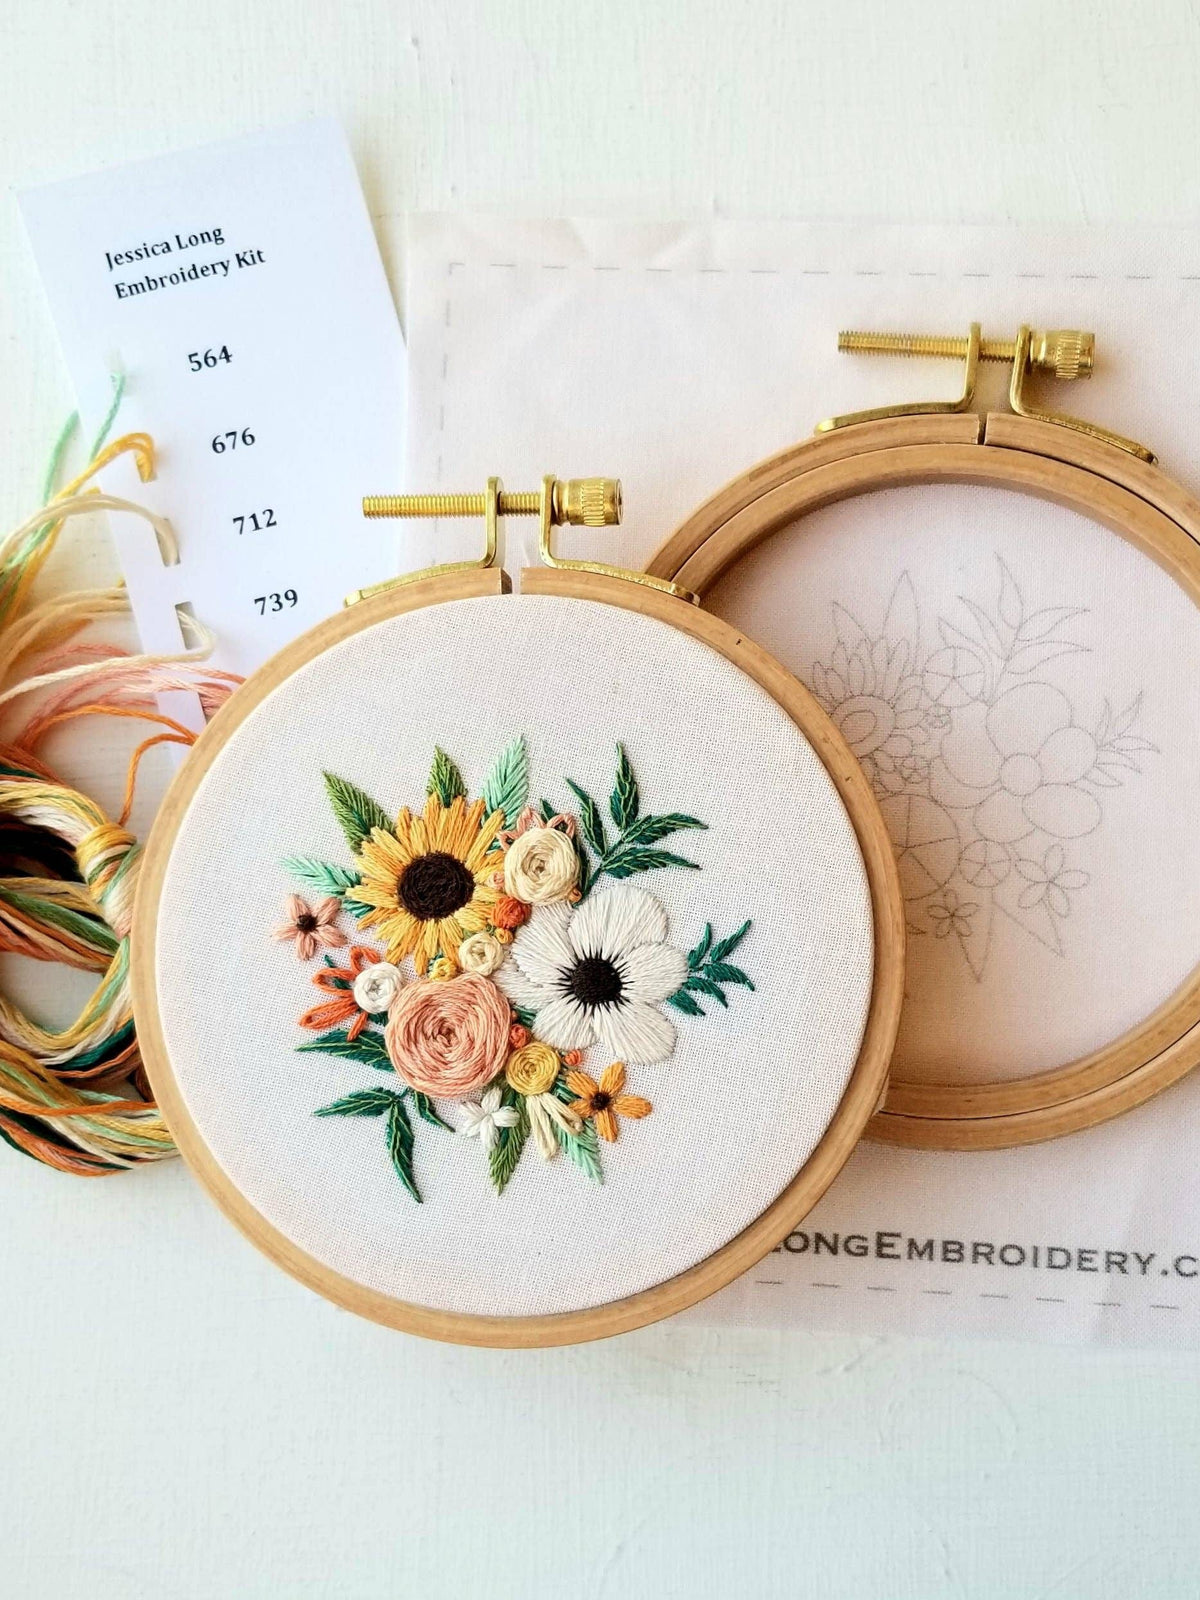 Jessica Long Embroidery Embroidery Kit Cozy Harvest Embroidery Kit